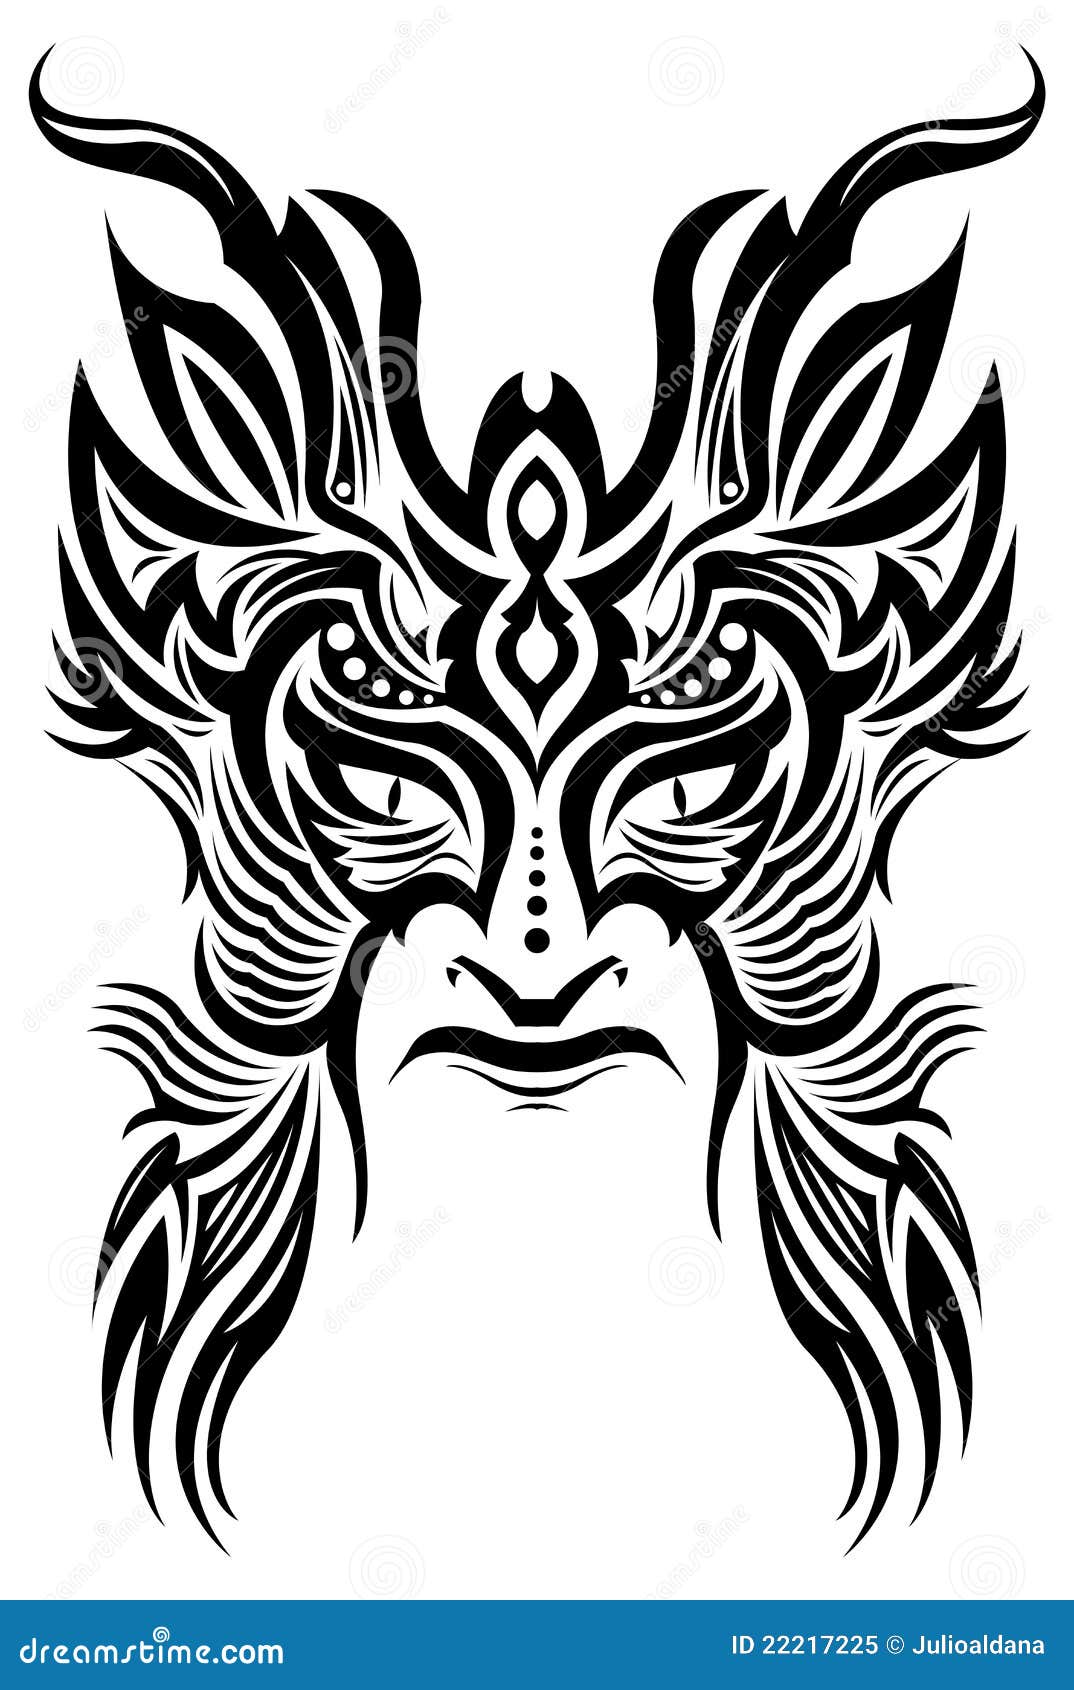 vector free download tattoo - photo #9